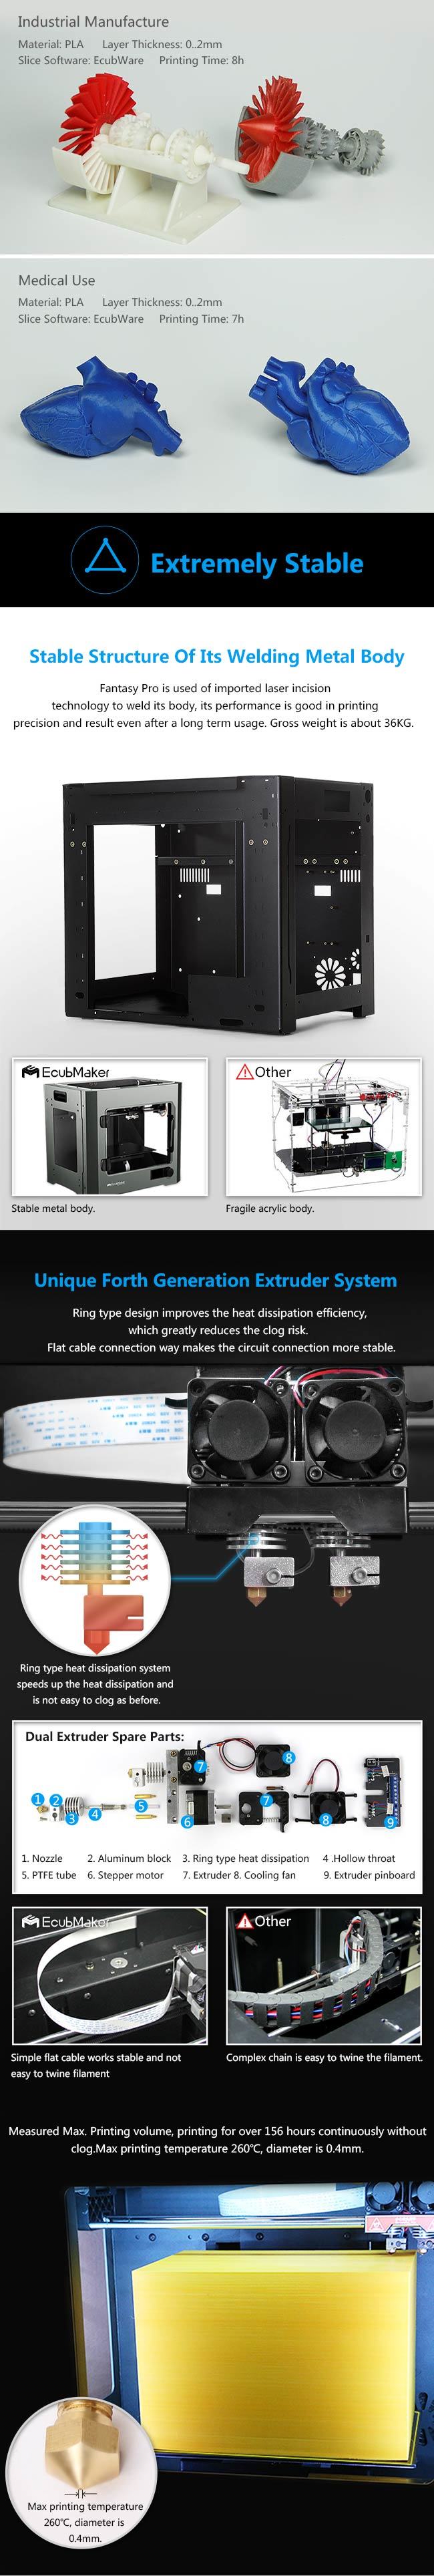 Ecubmaker Advanced 3D Printing Tech Safe, Easy-to-Use, High Precision and Professional 3D Printer